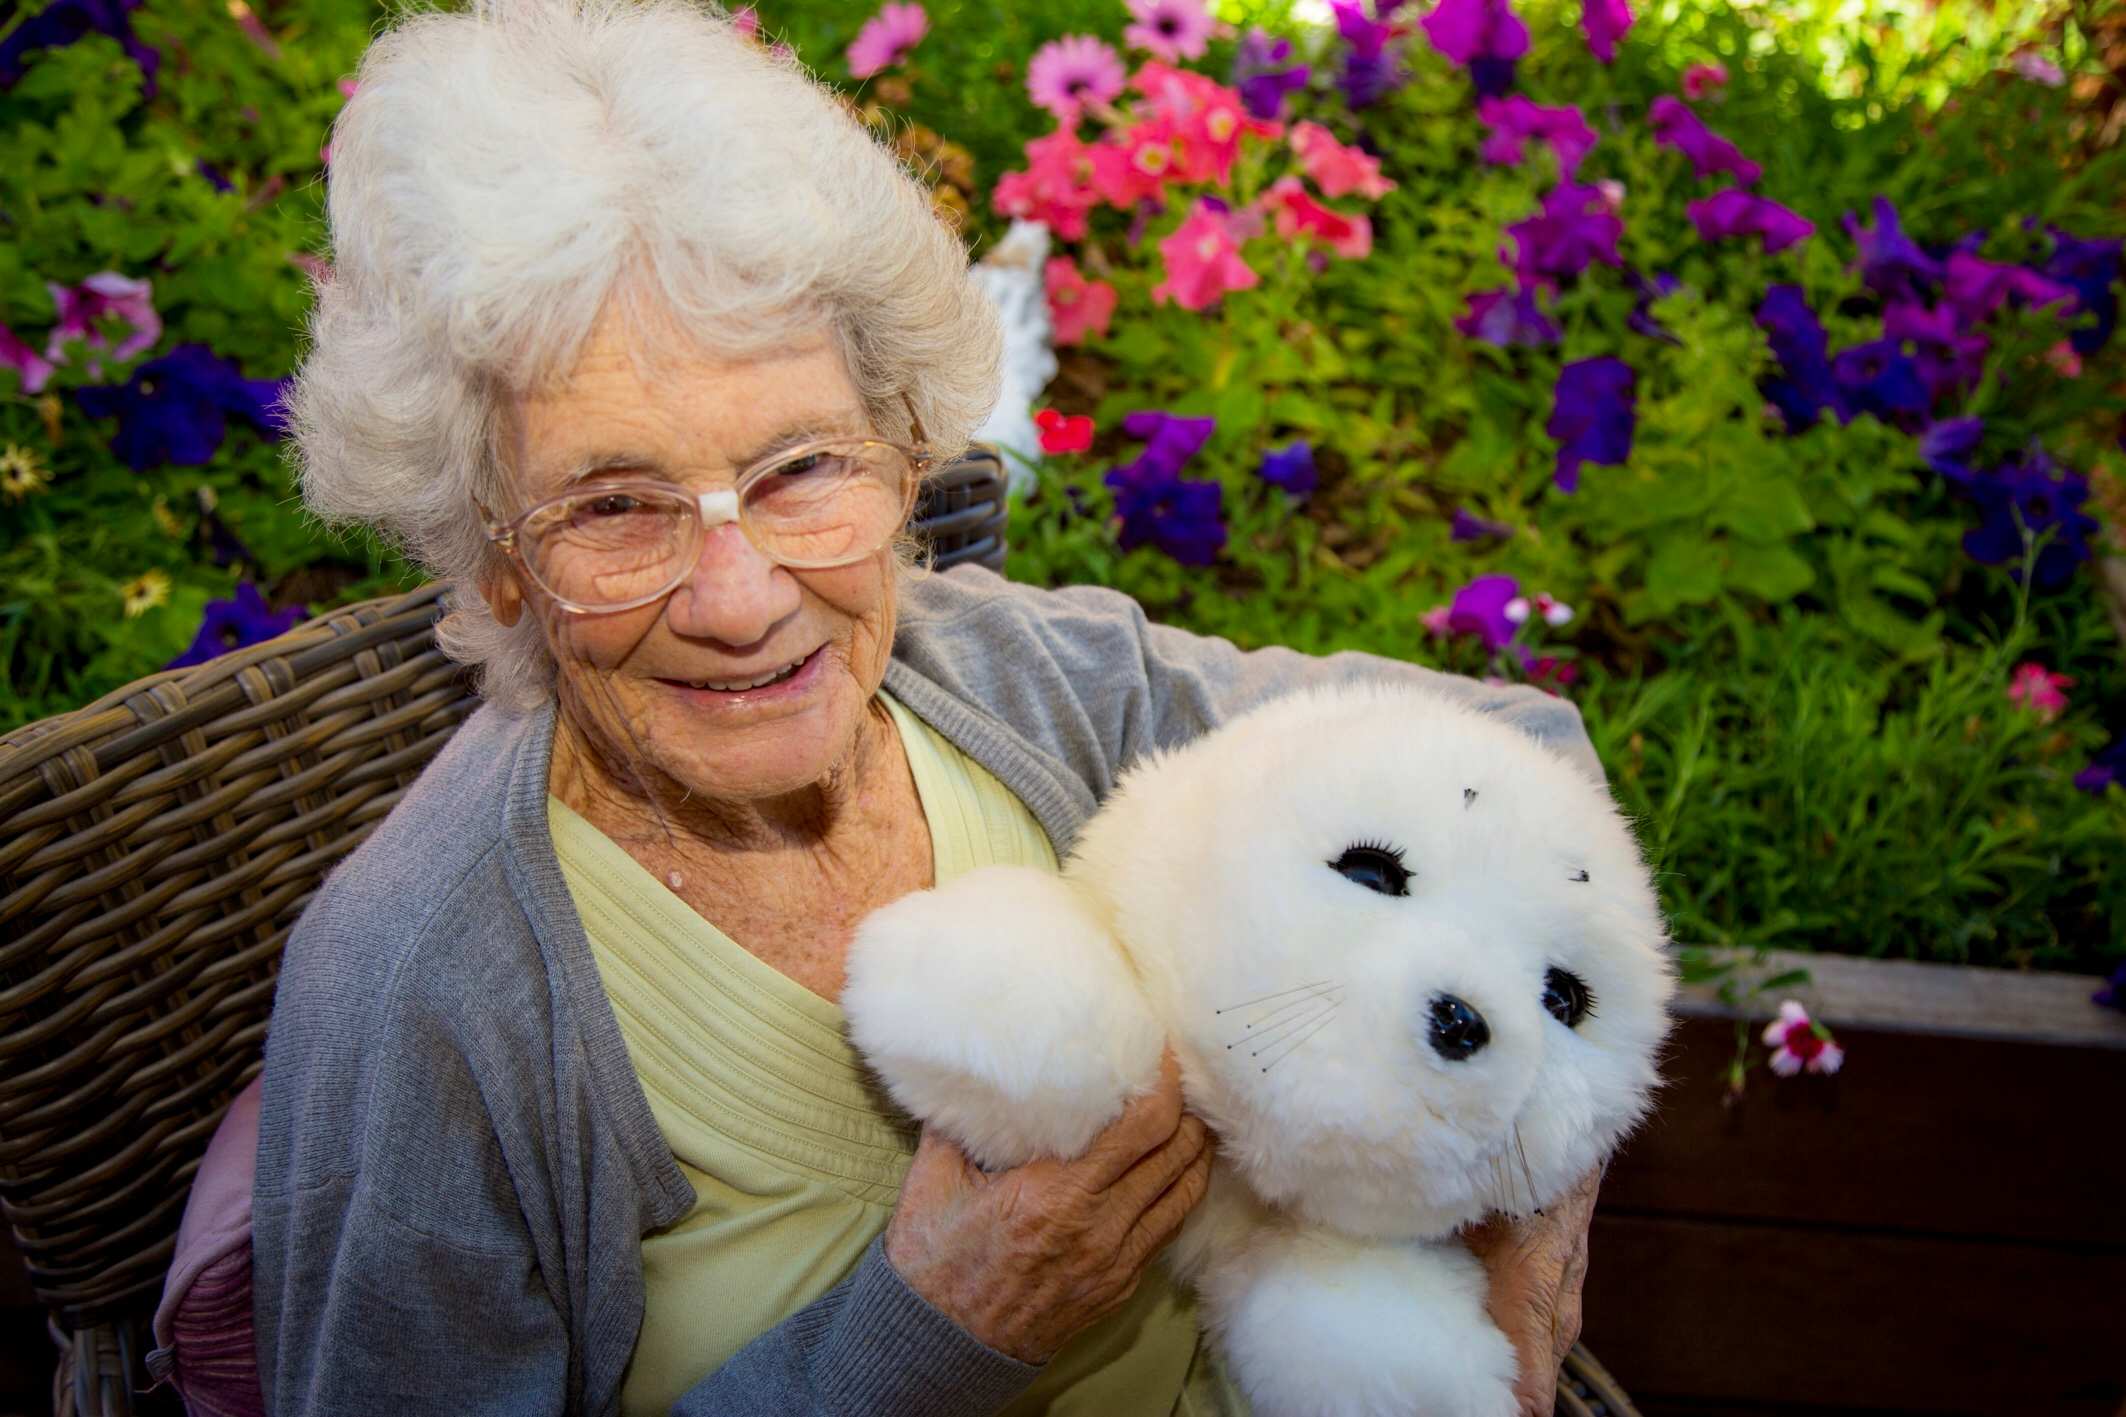 the robotic seal provides unconditional love for aged care residents - ABC News